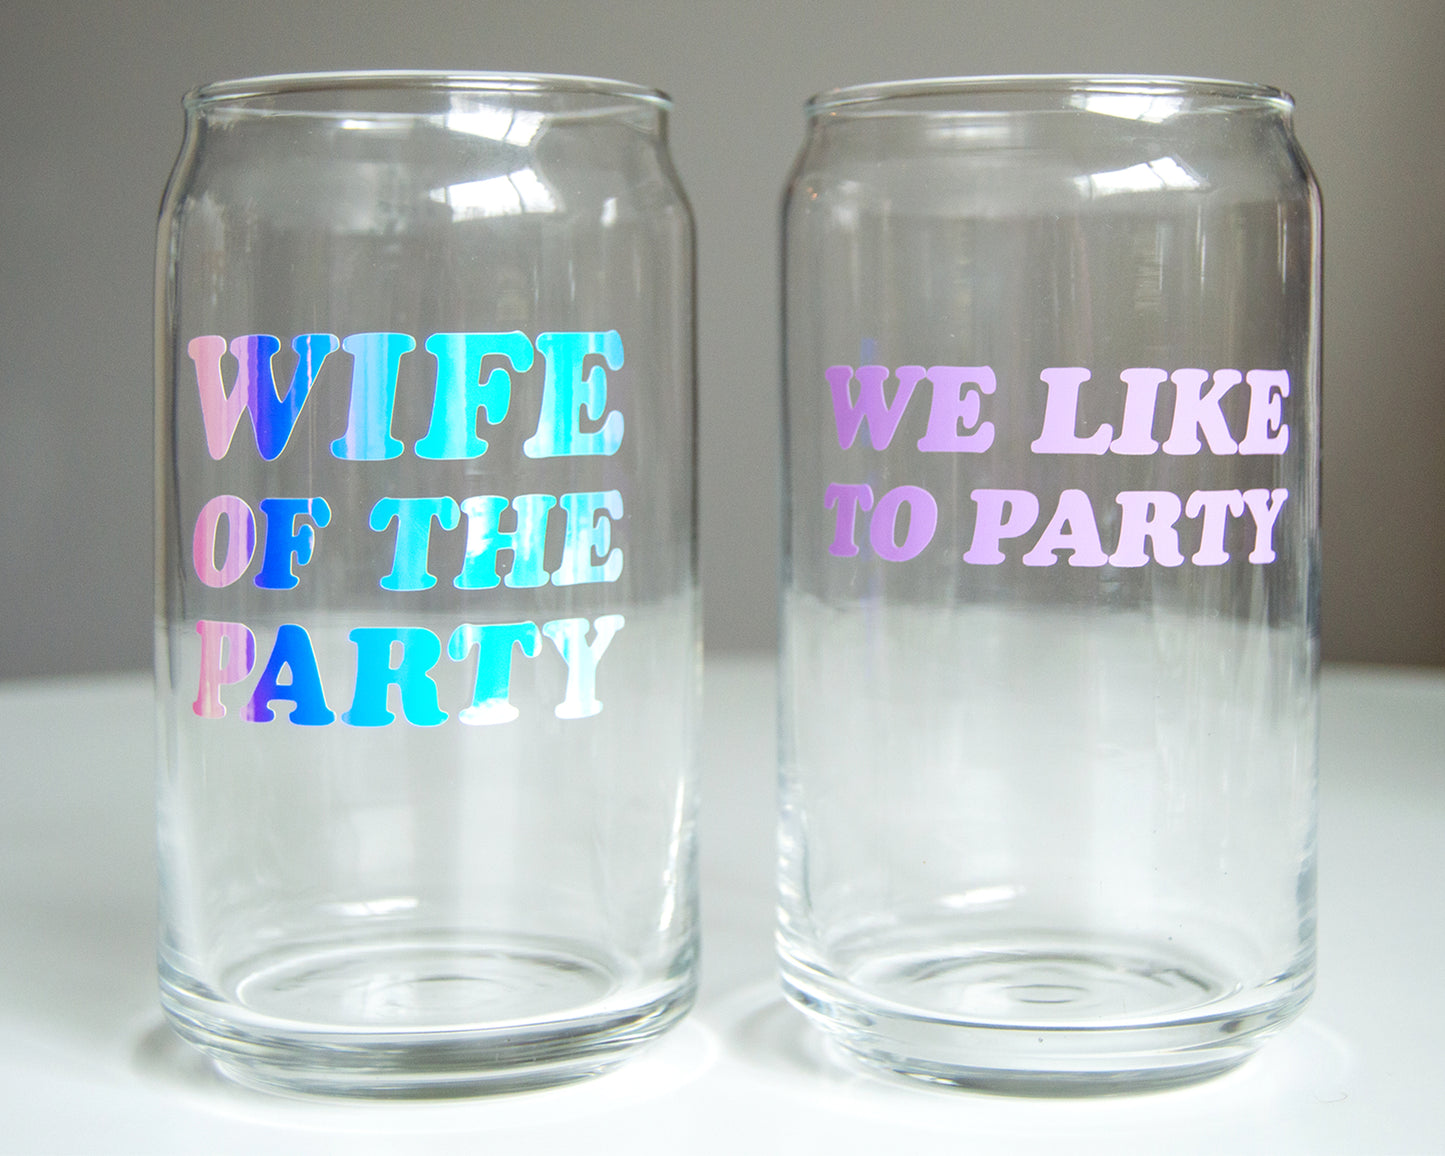 Wife of The Party + We Like To Party Glass Can Cups